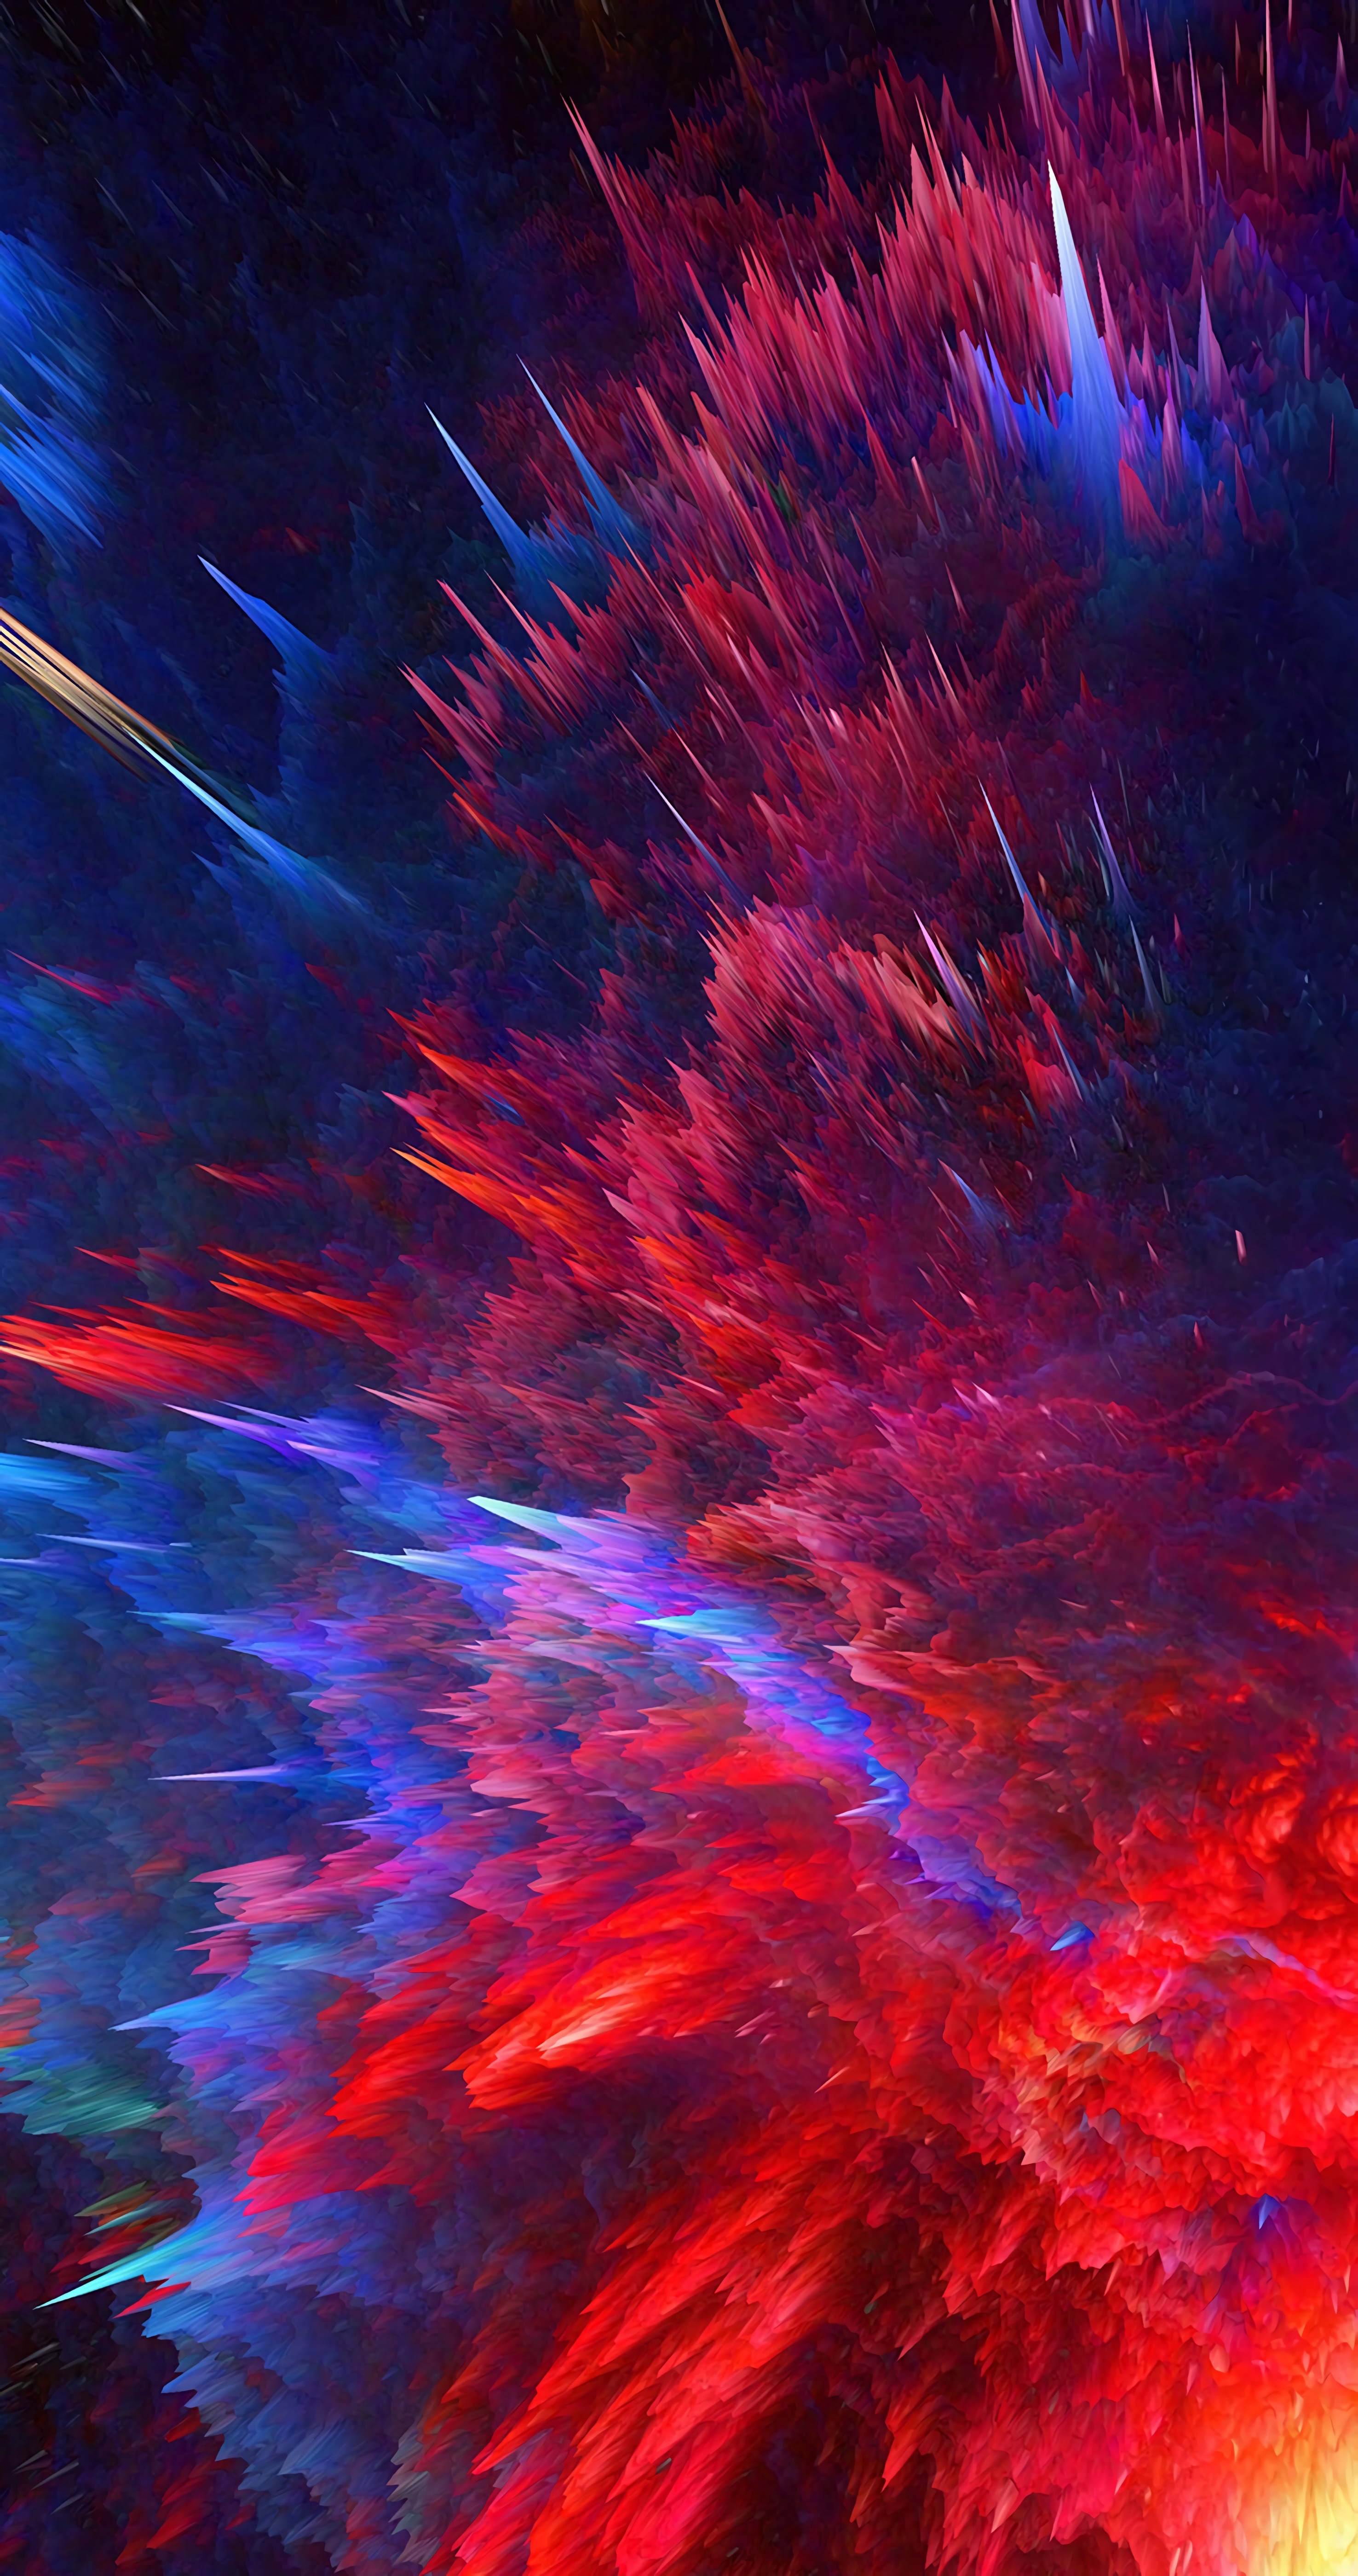 54678 download wallpaper 3d, lines, bright, form, forms, cosmic explosion, space explosion screensavers and pictures for free